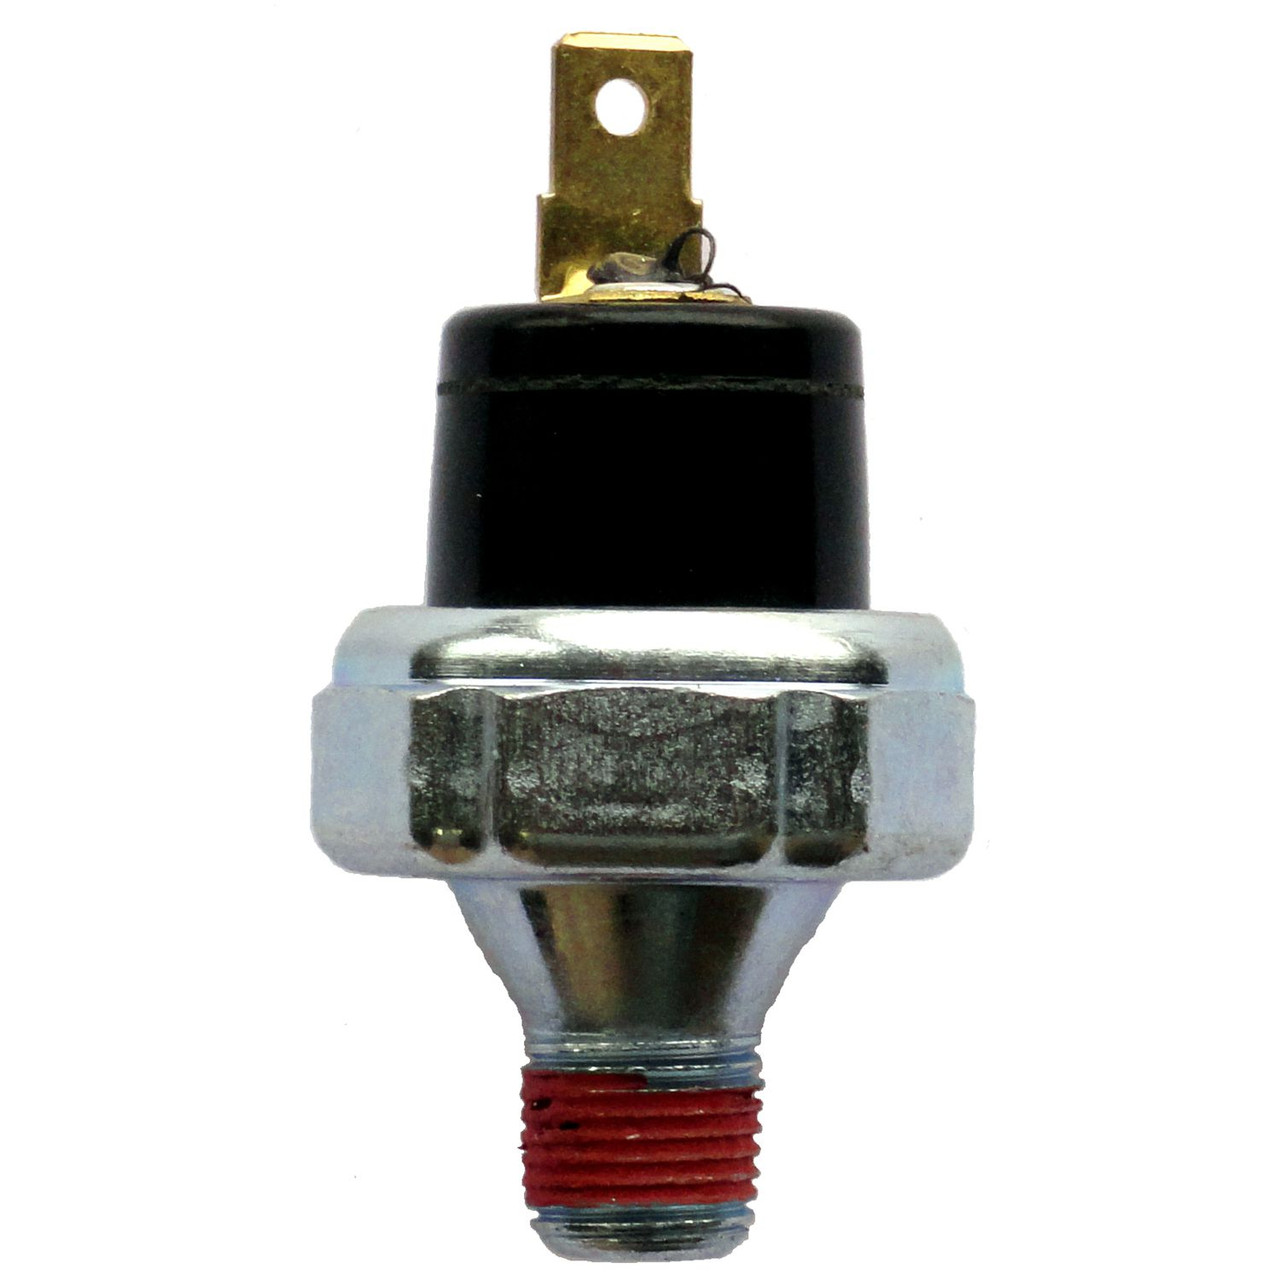 Pressure-operated switch, internally grounded. Has one “quick-connect”, 1/4″ spade terminal. Switch is normally closed, closing on a decrease in pressure at 6-10PSI, but open above.
Operating range: 0-250PSI, withstands 160PSI continuous without leaking.
Operating temperature: -40°F to 250°F (-40°C to 121°C).
Current rated for 1A at 12VDC.
Optional WeatherPack Connector.